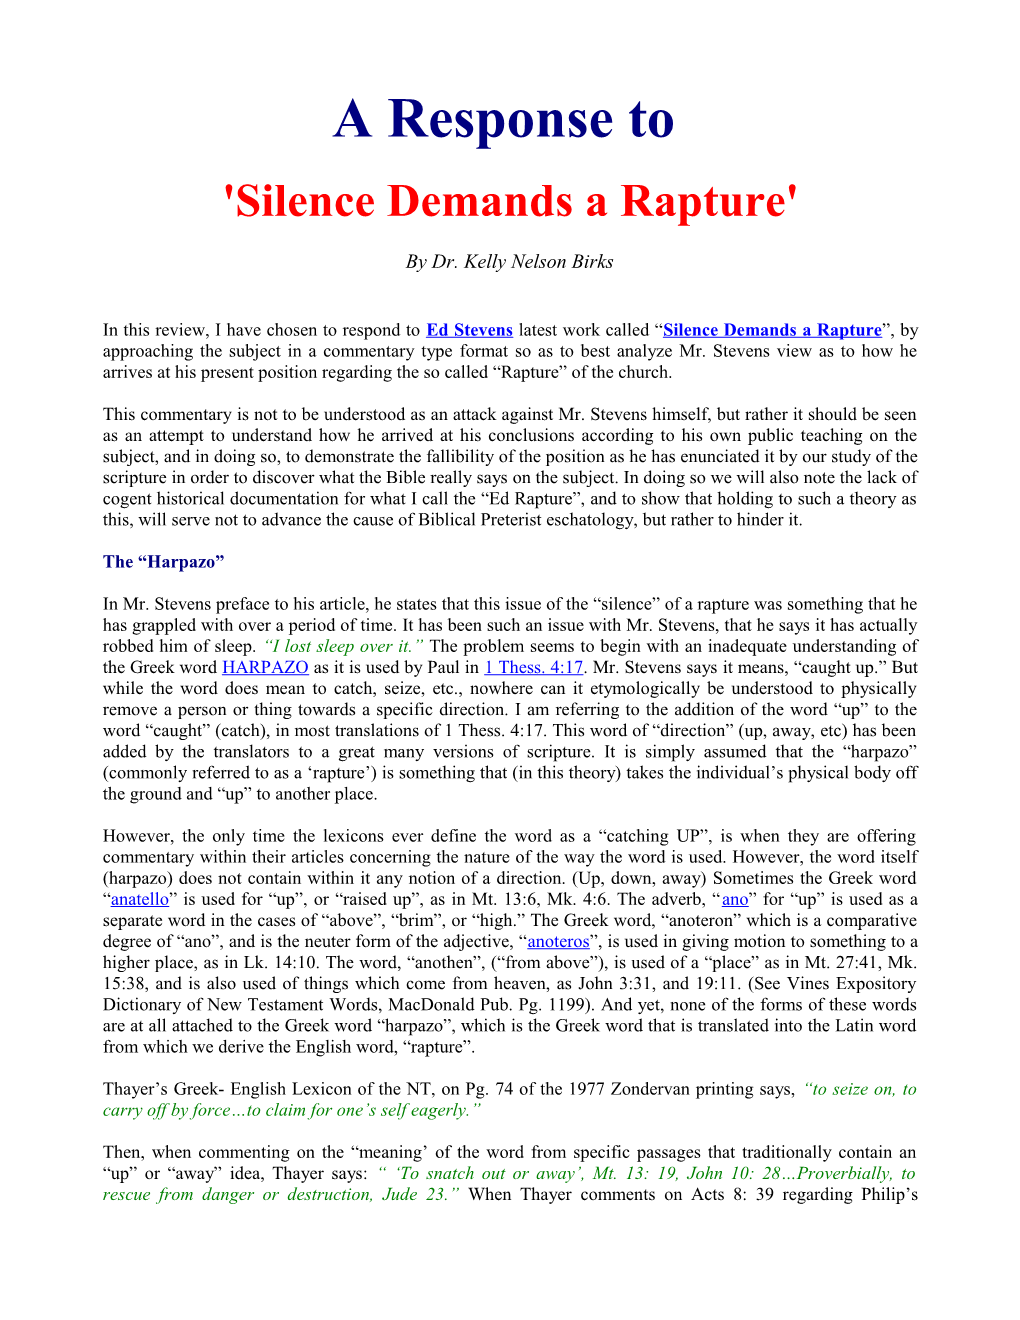 A Response to 'Silence Demands a Rapture'